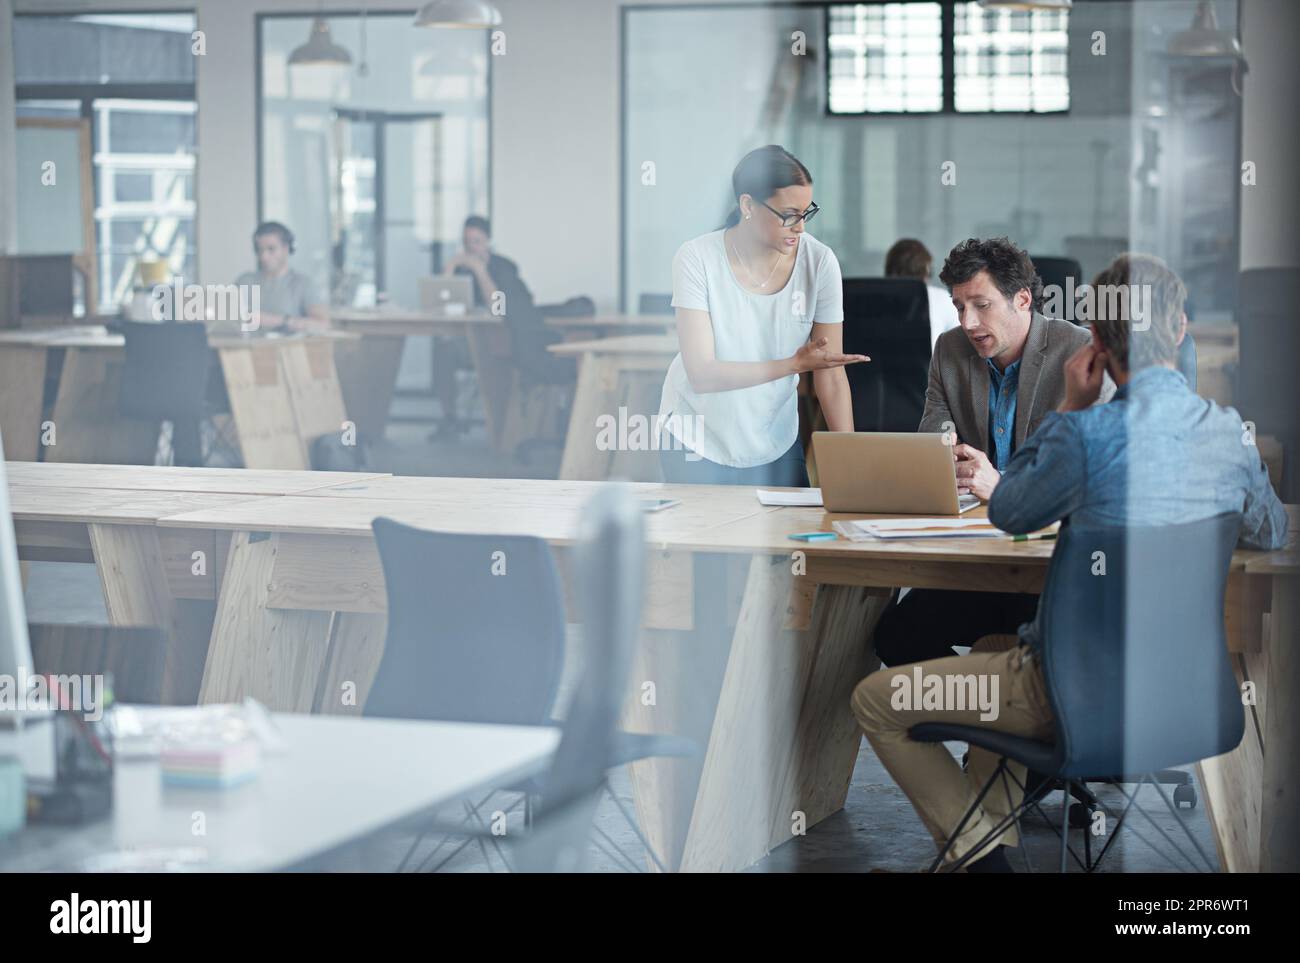 They make business happen. Through the glass shot of a group of colleagues working together in an office. Stock Photo